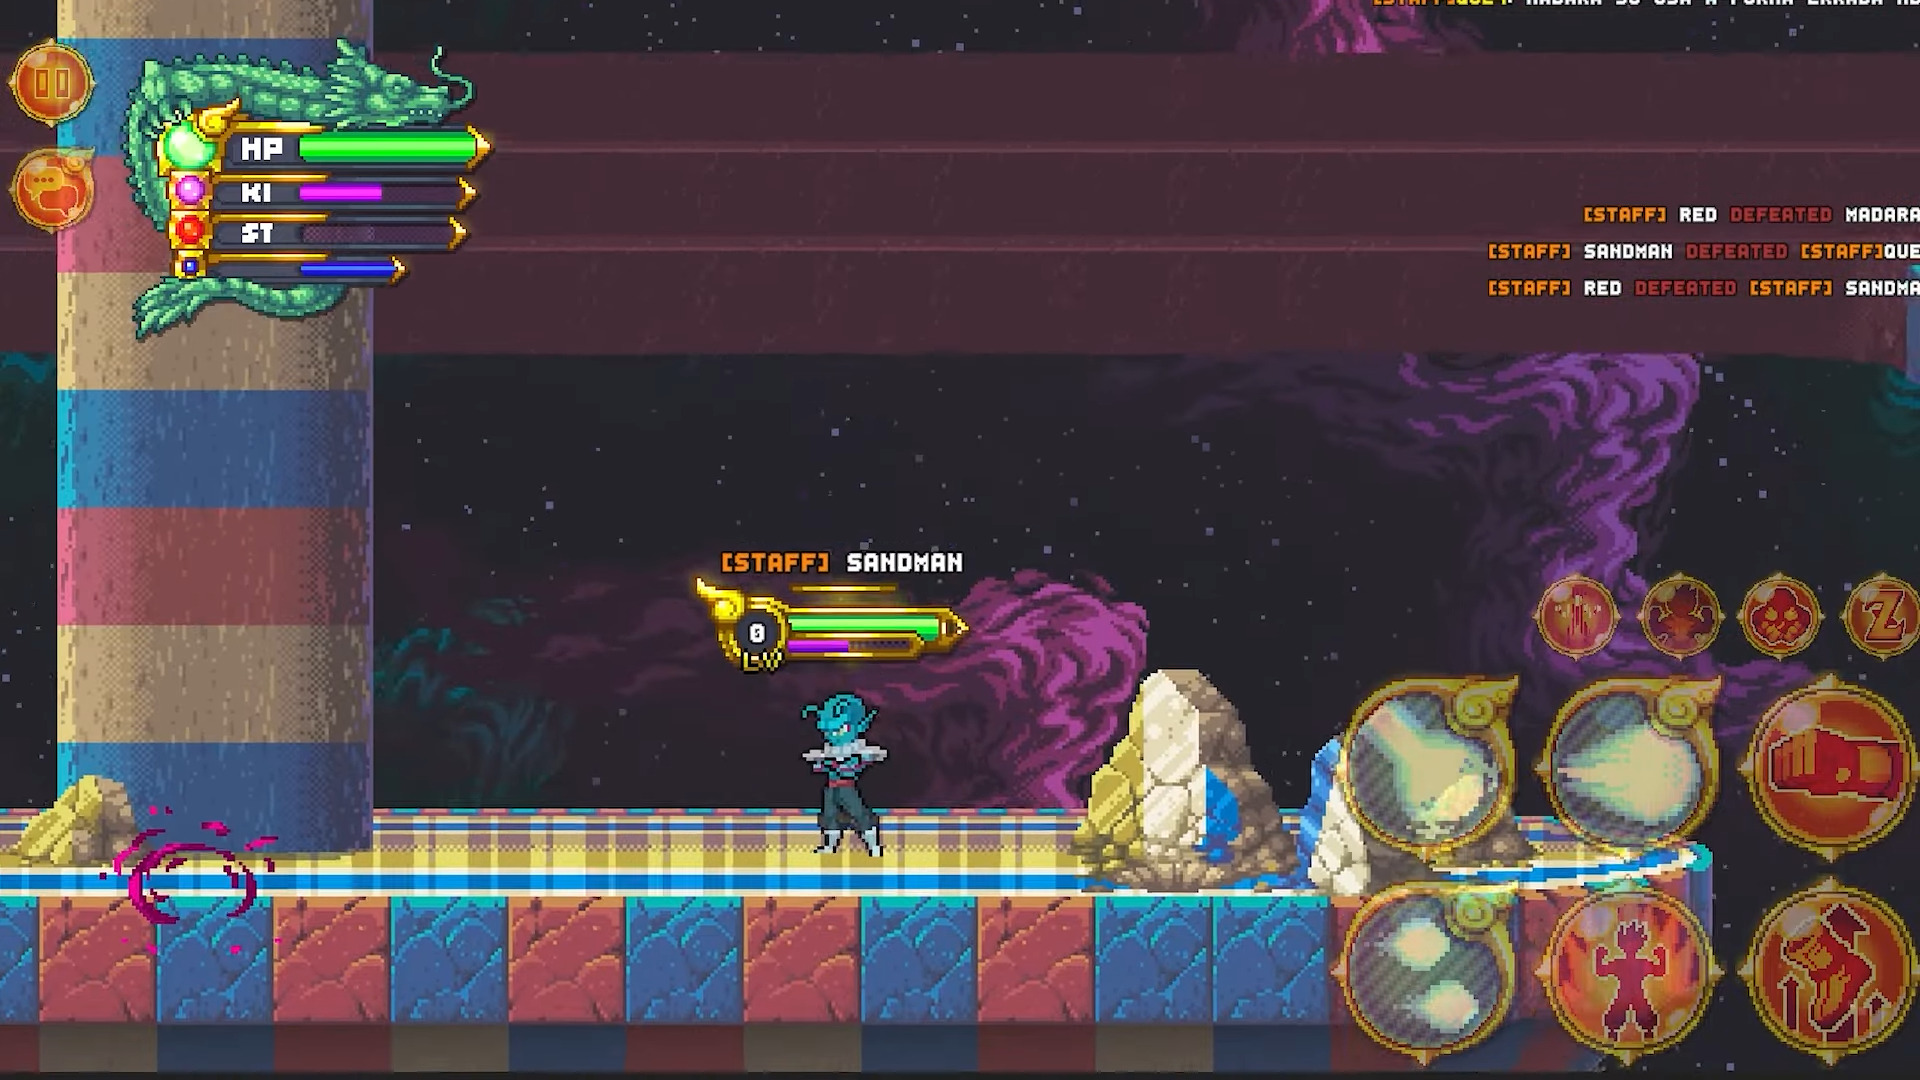 Download XENO BALL: LEGENDS WARRIORS Android free game.